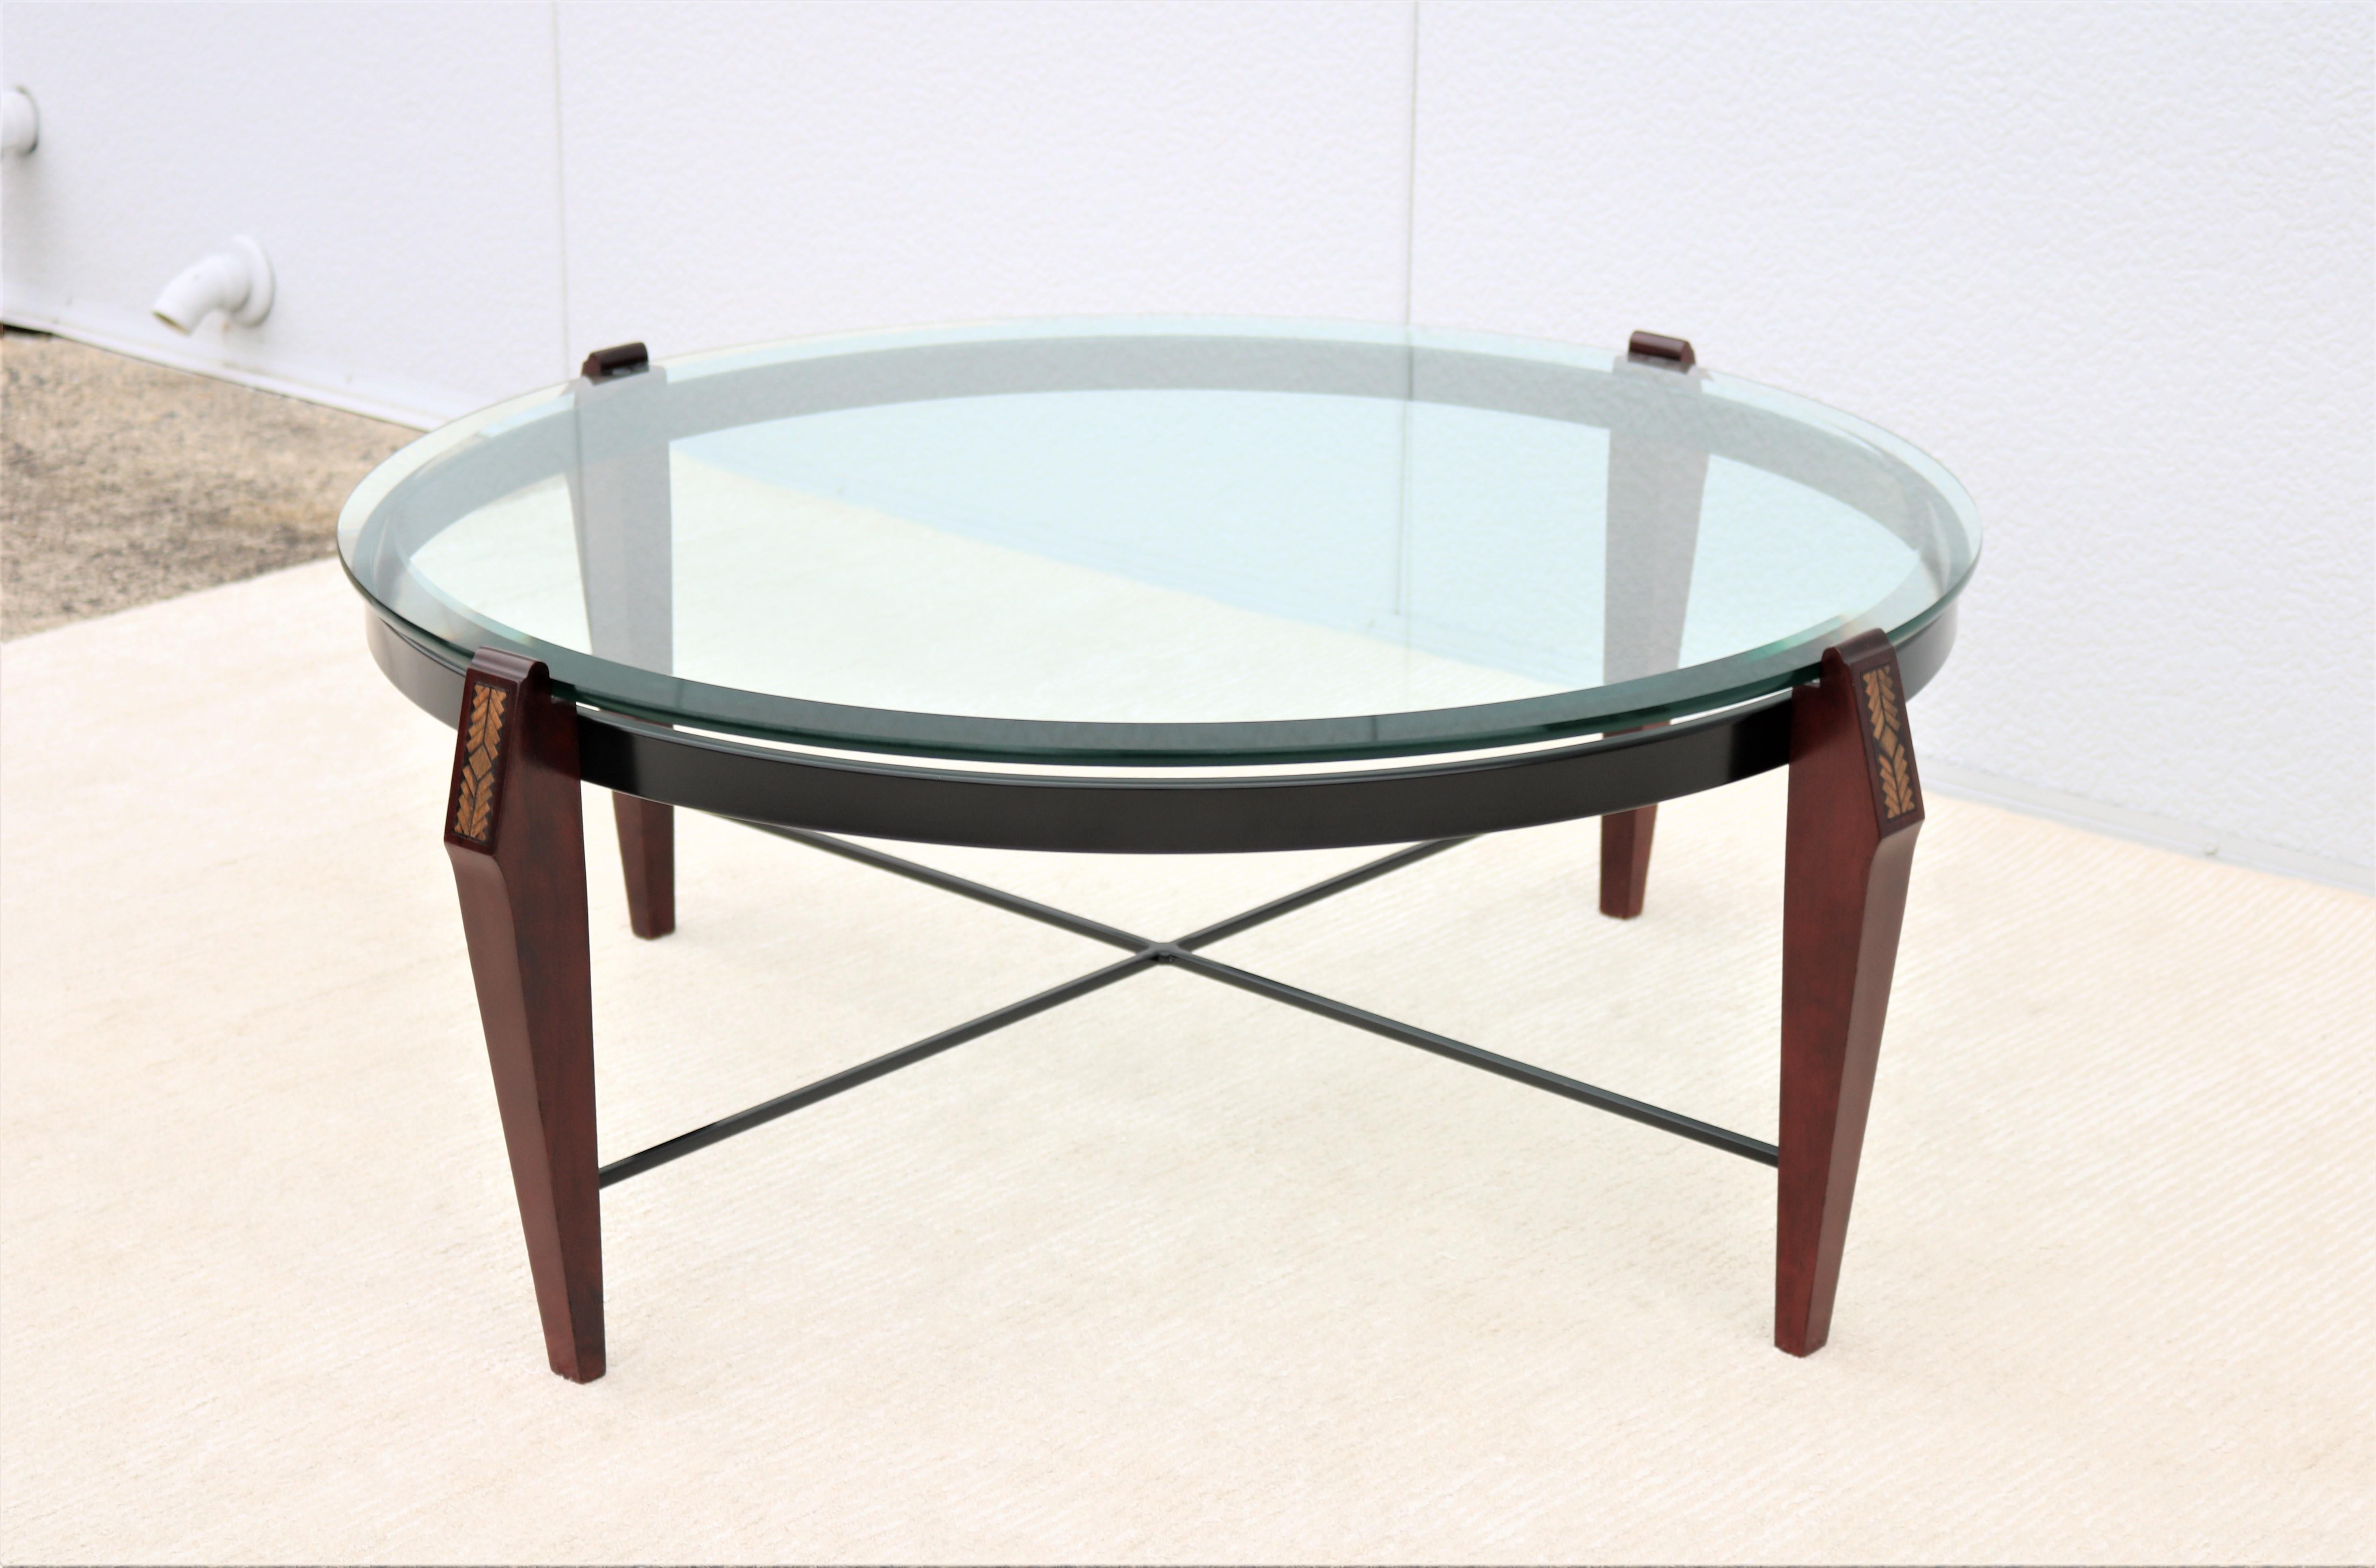 Traditional Cherry Wood and Transparent Glass Round Coffee Table In Good Condition For Sale In Secaucus, NJ